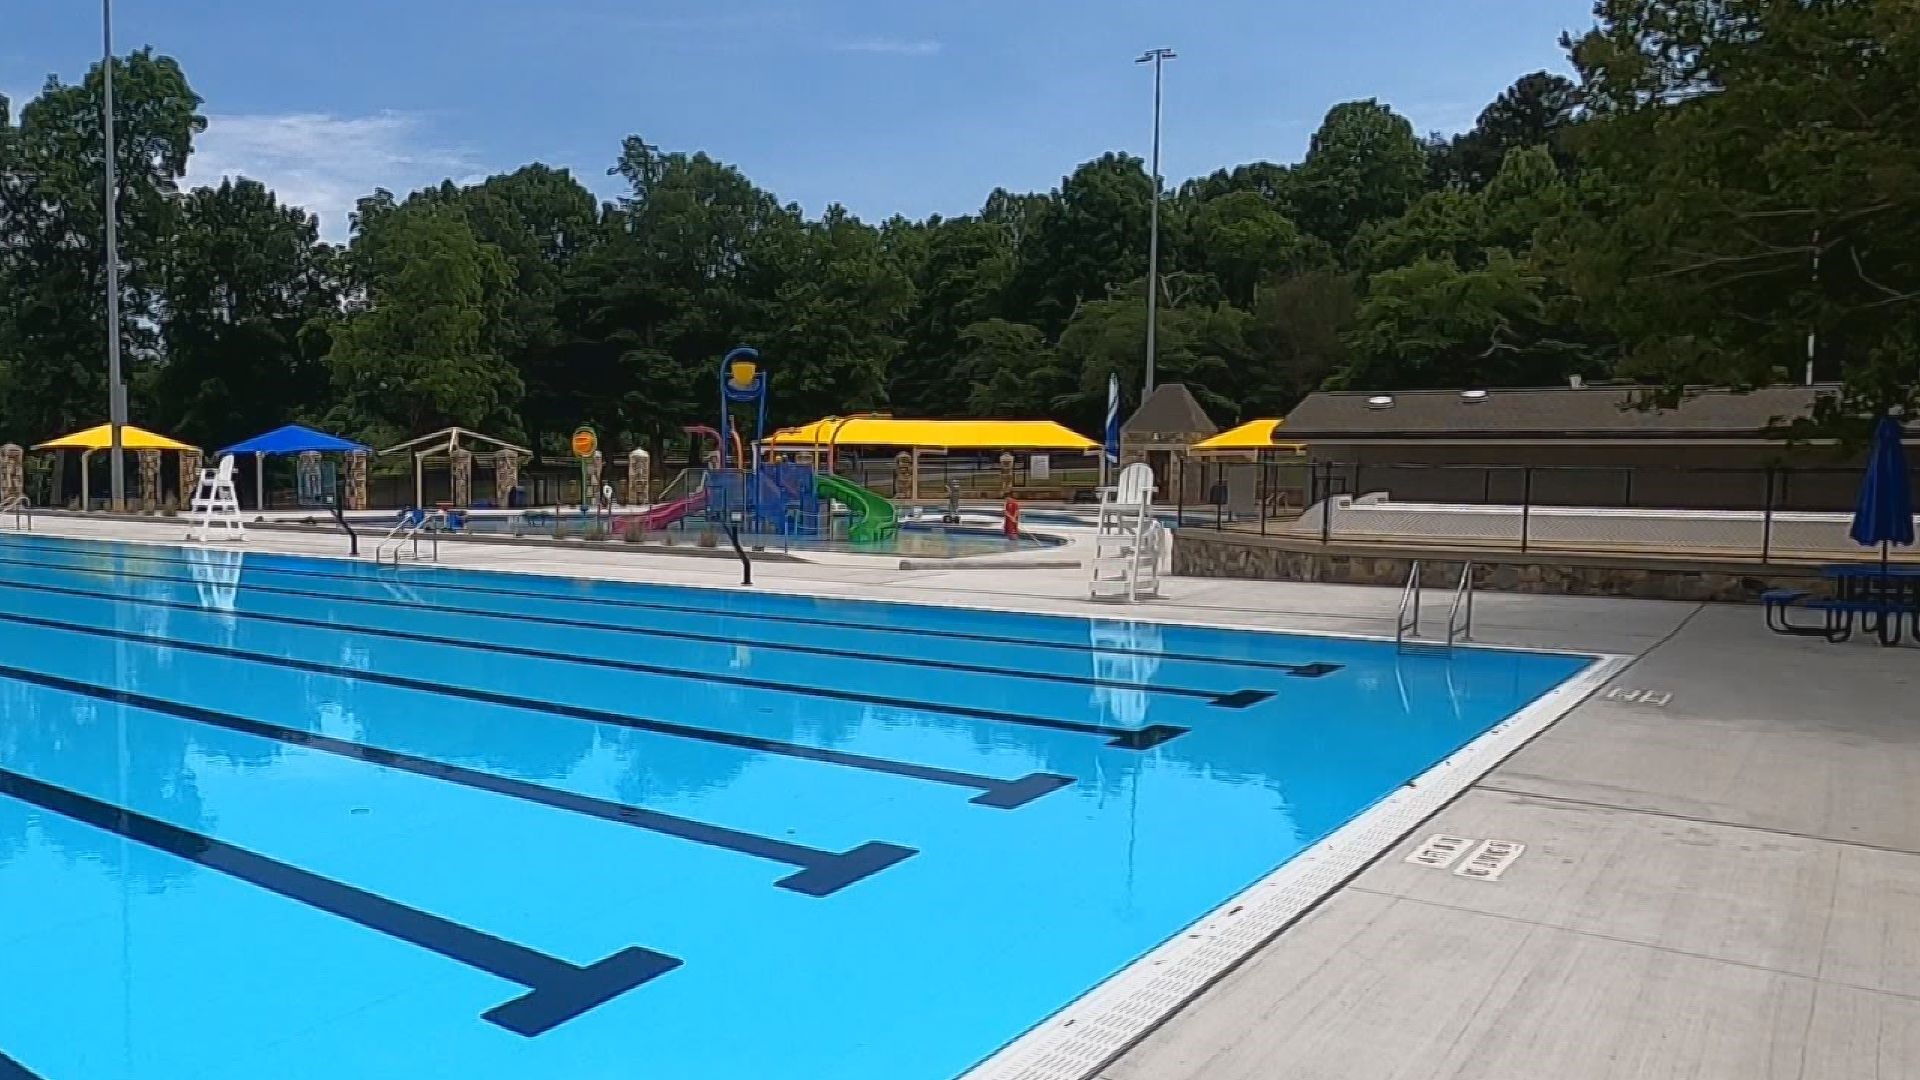 The pool will open Saturday, May 27.